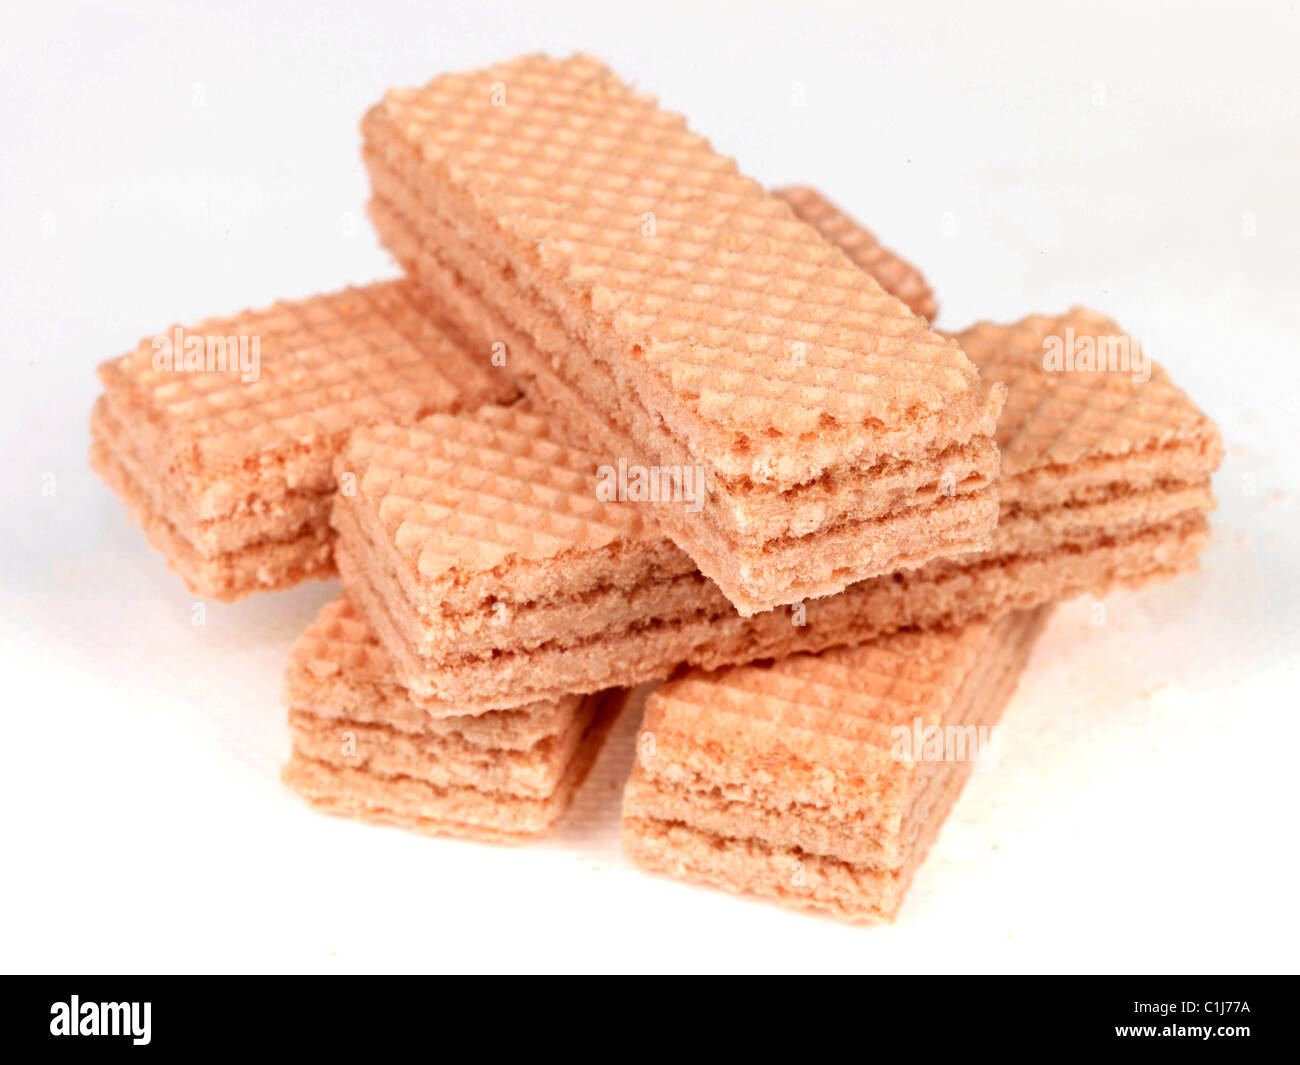 Wafer Biscuits Stock Photo